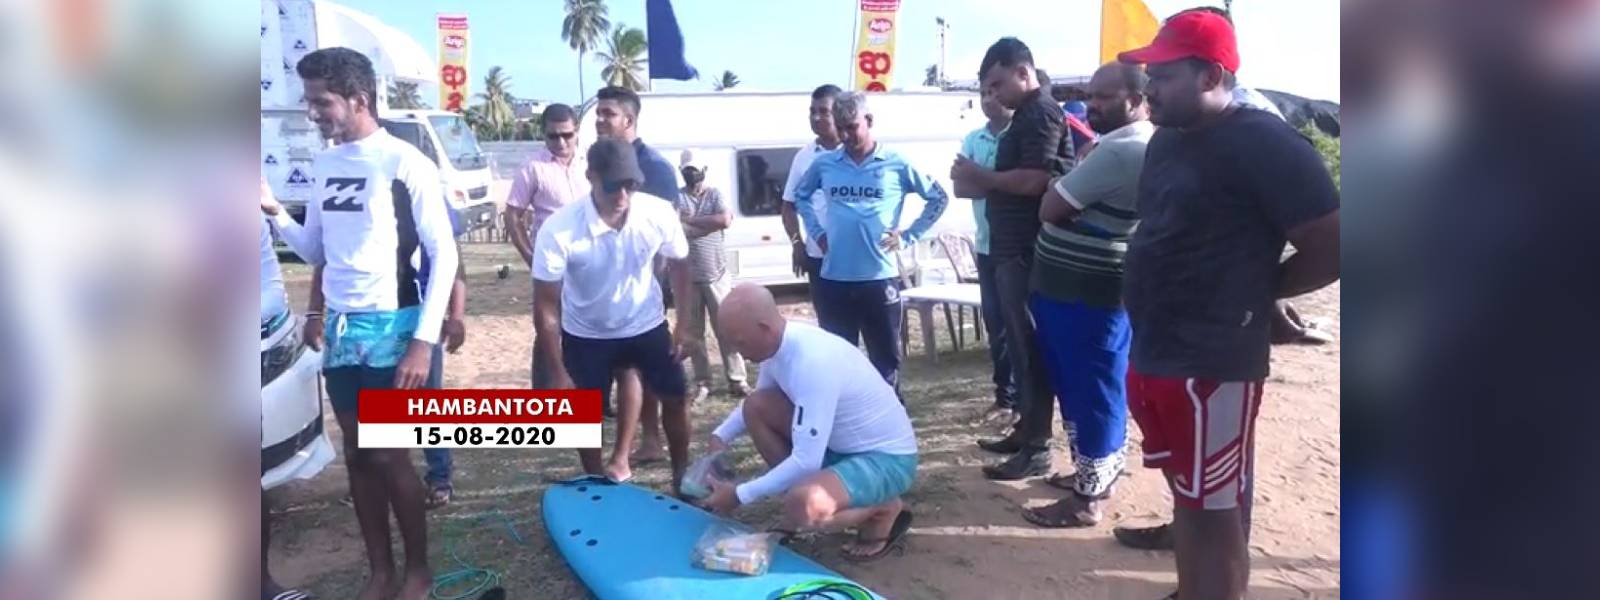 Hambantota beach games takes place for second day